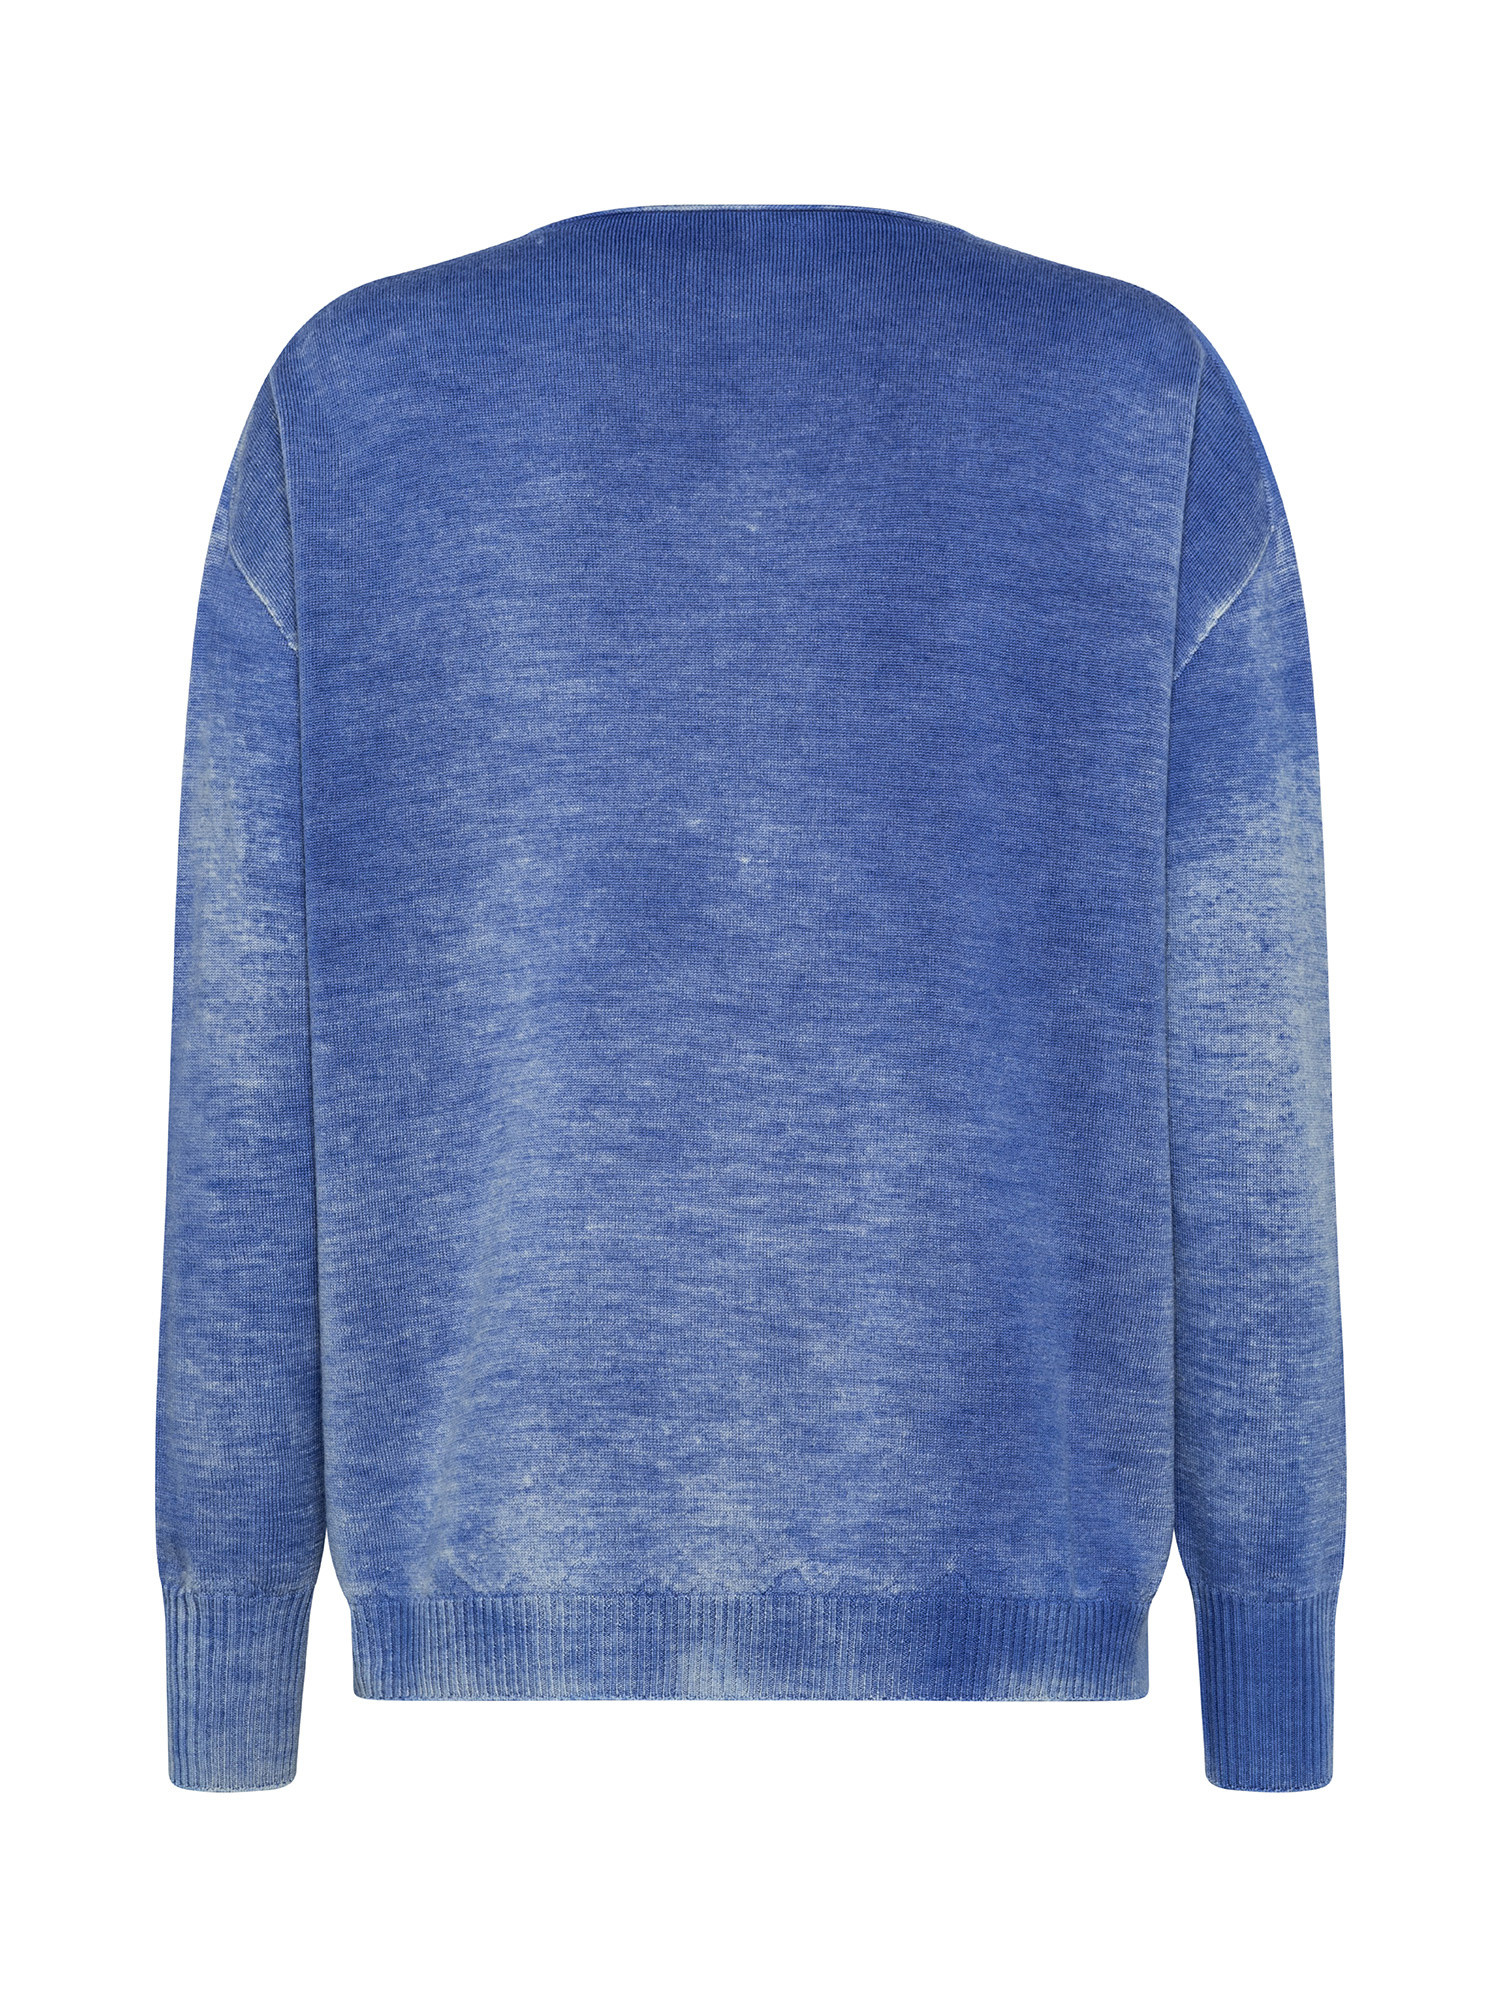 K Collection - V-neck sweater in extrafine wool, Blue, large image number 1